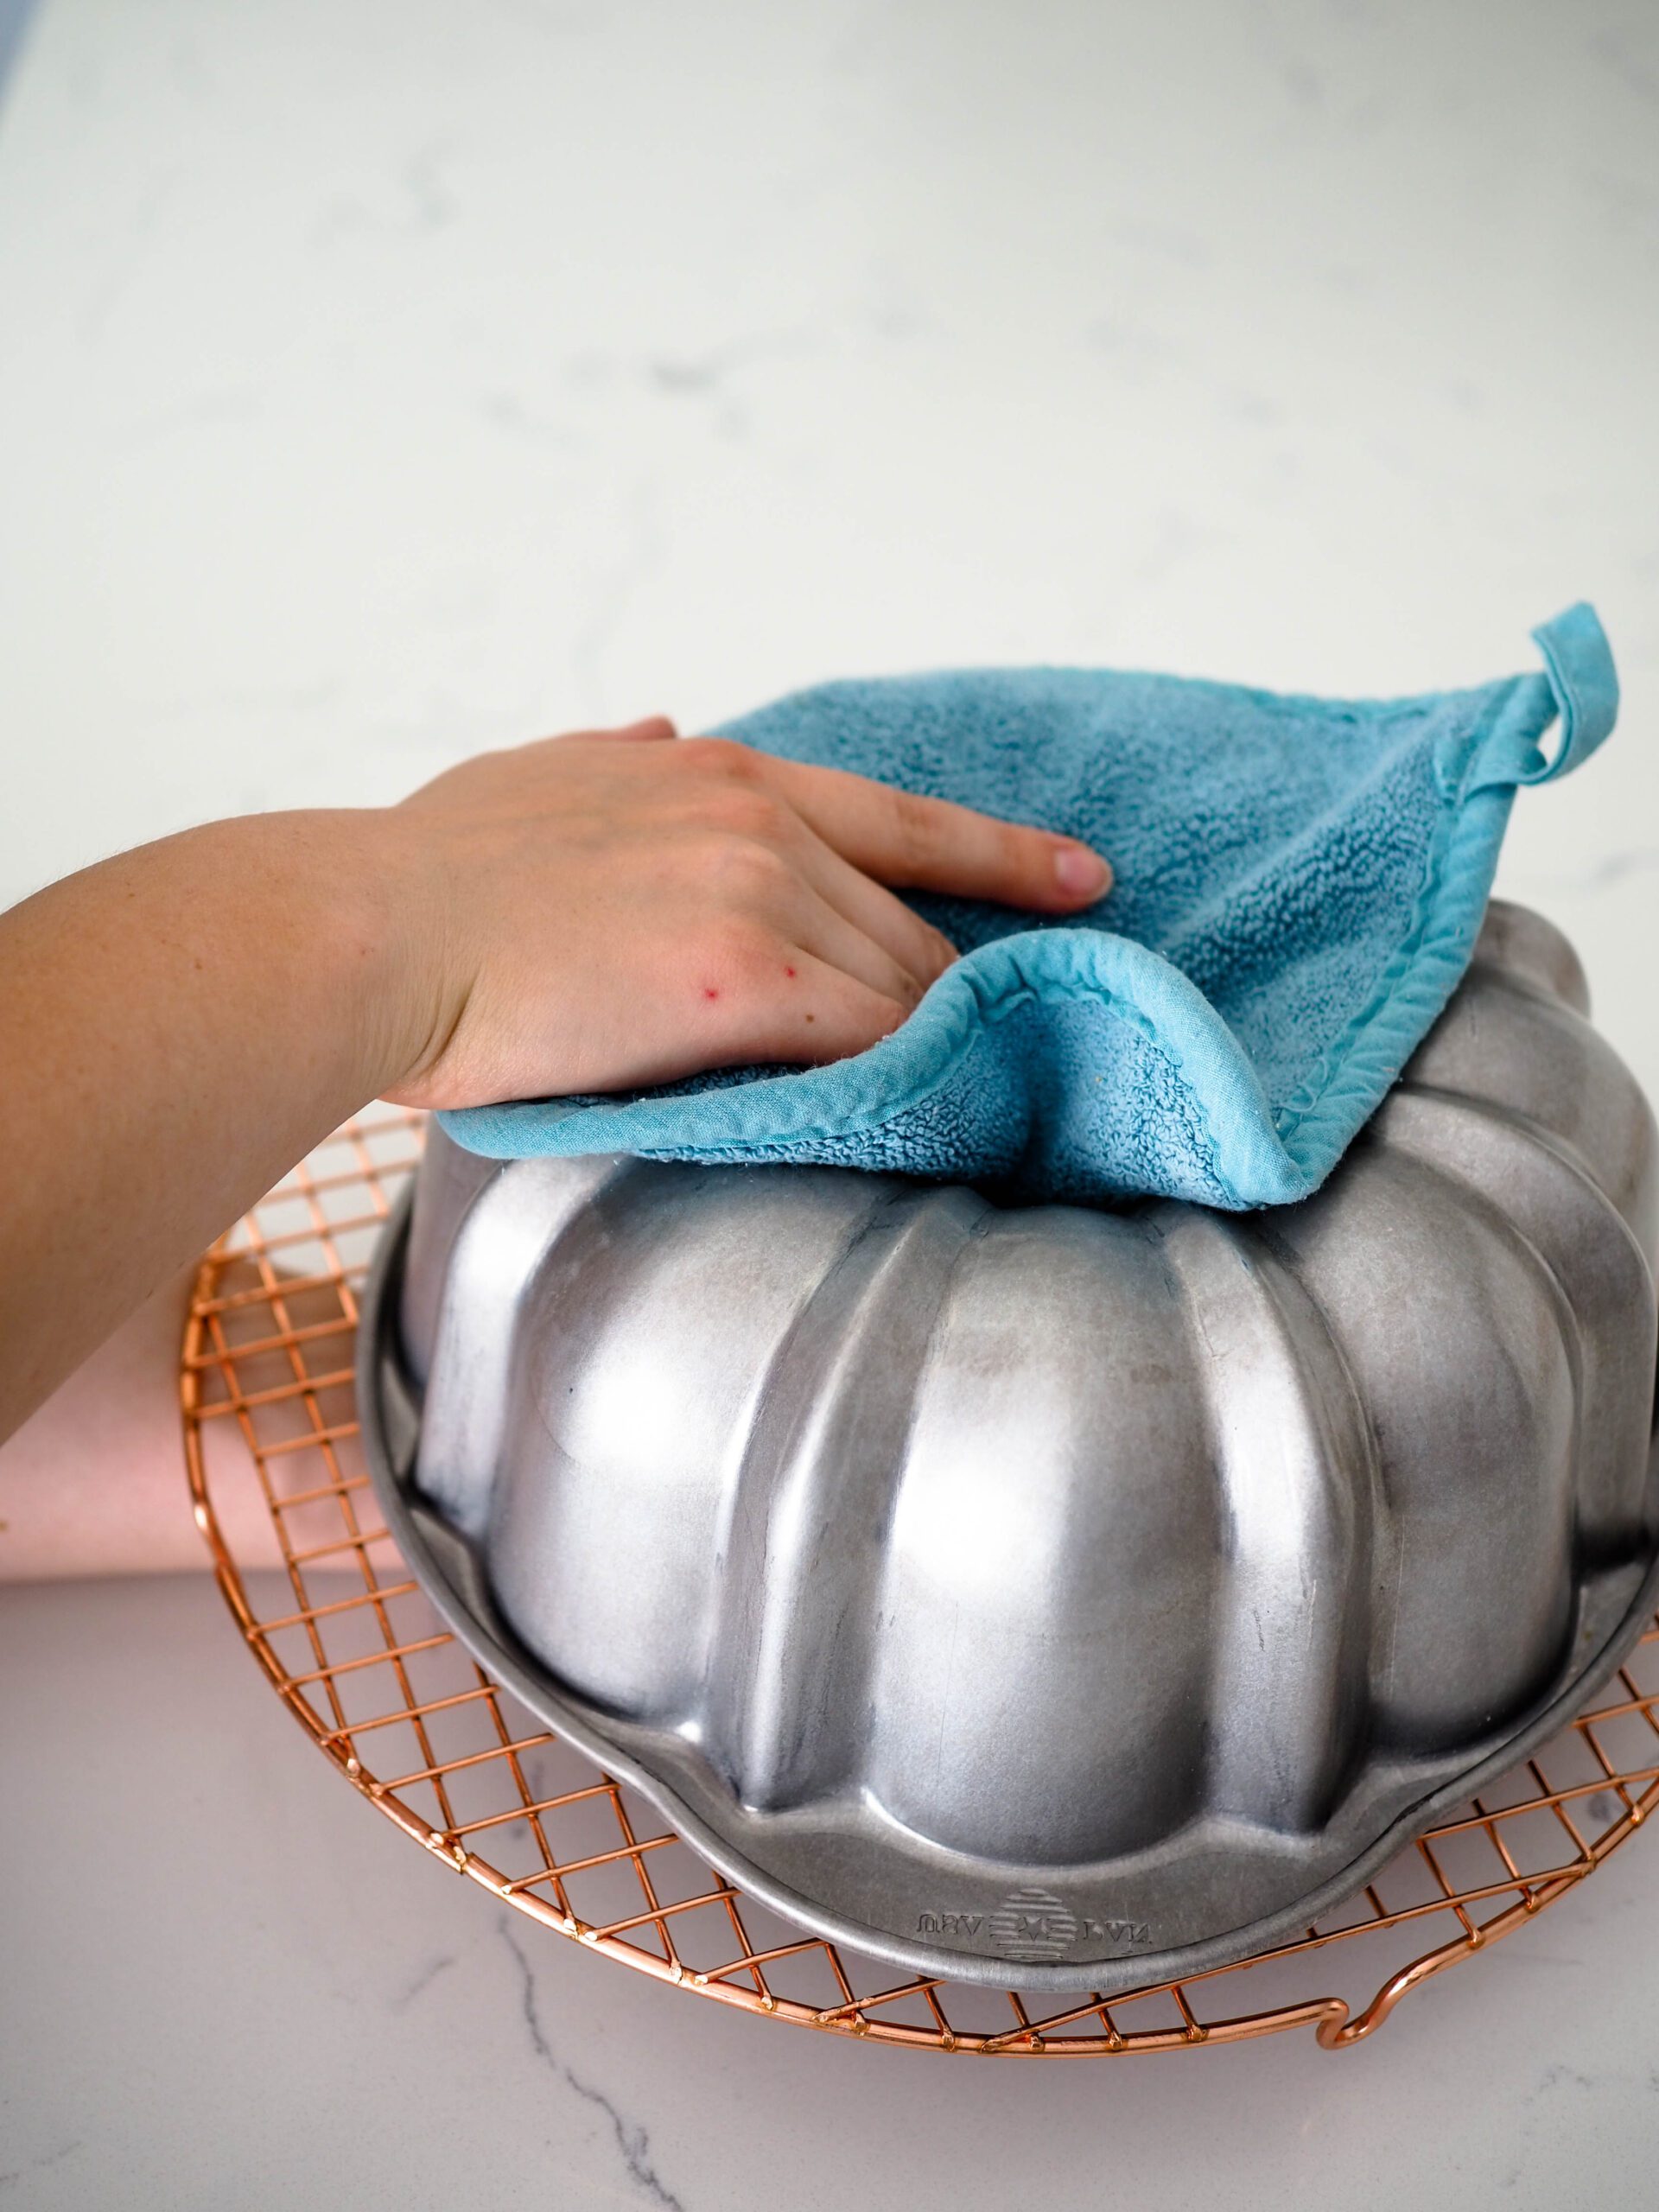 How to Remove a Bundt Cake from the Pan - The Floral Apron